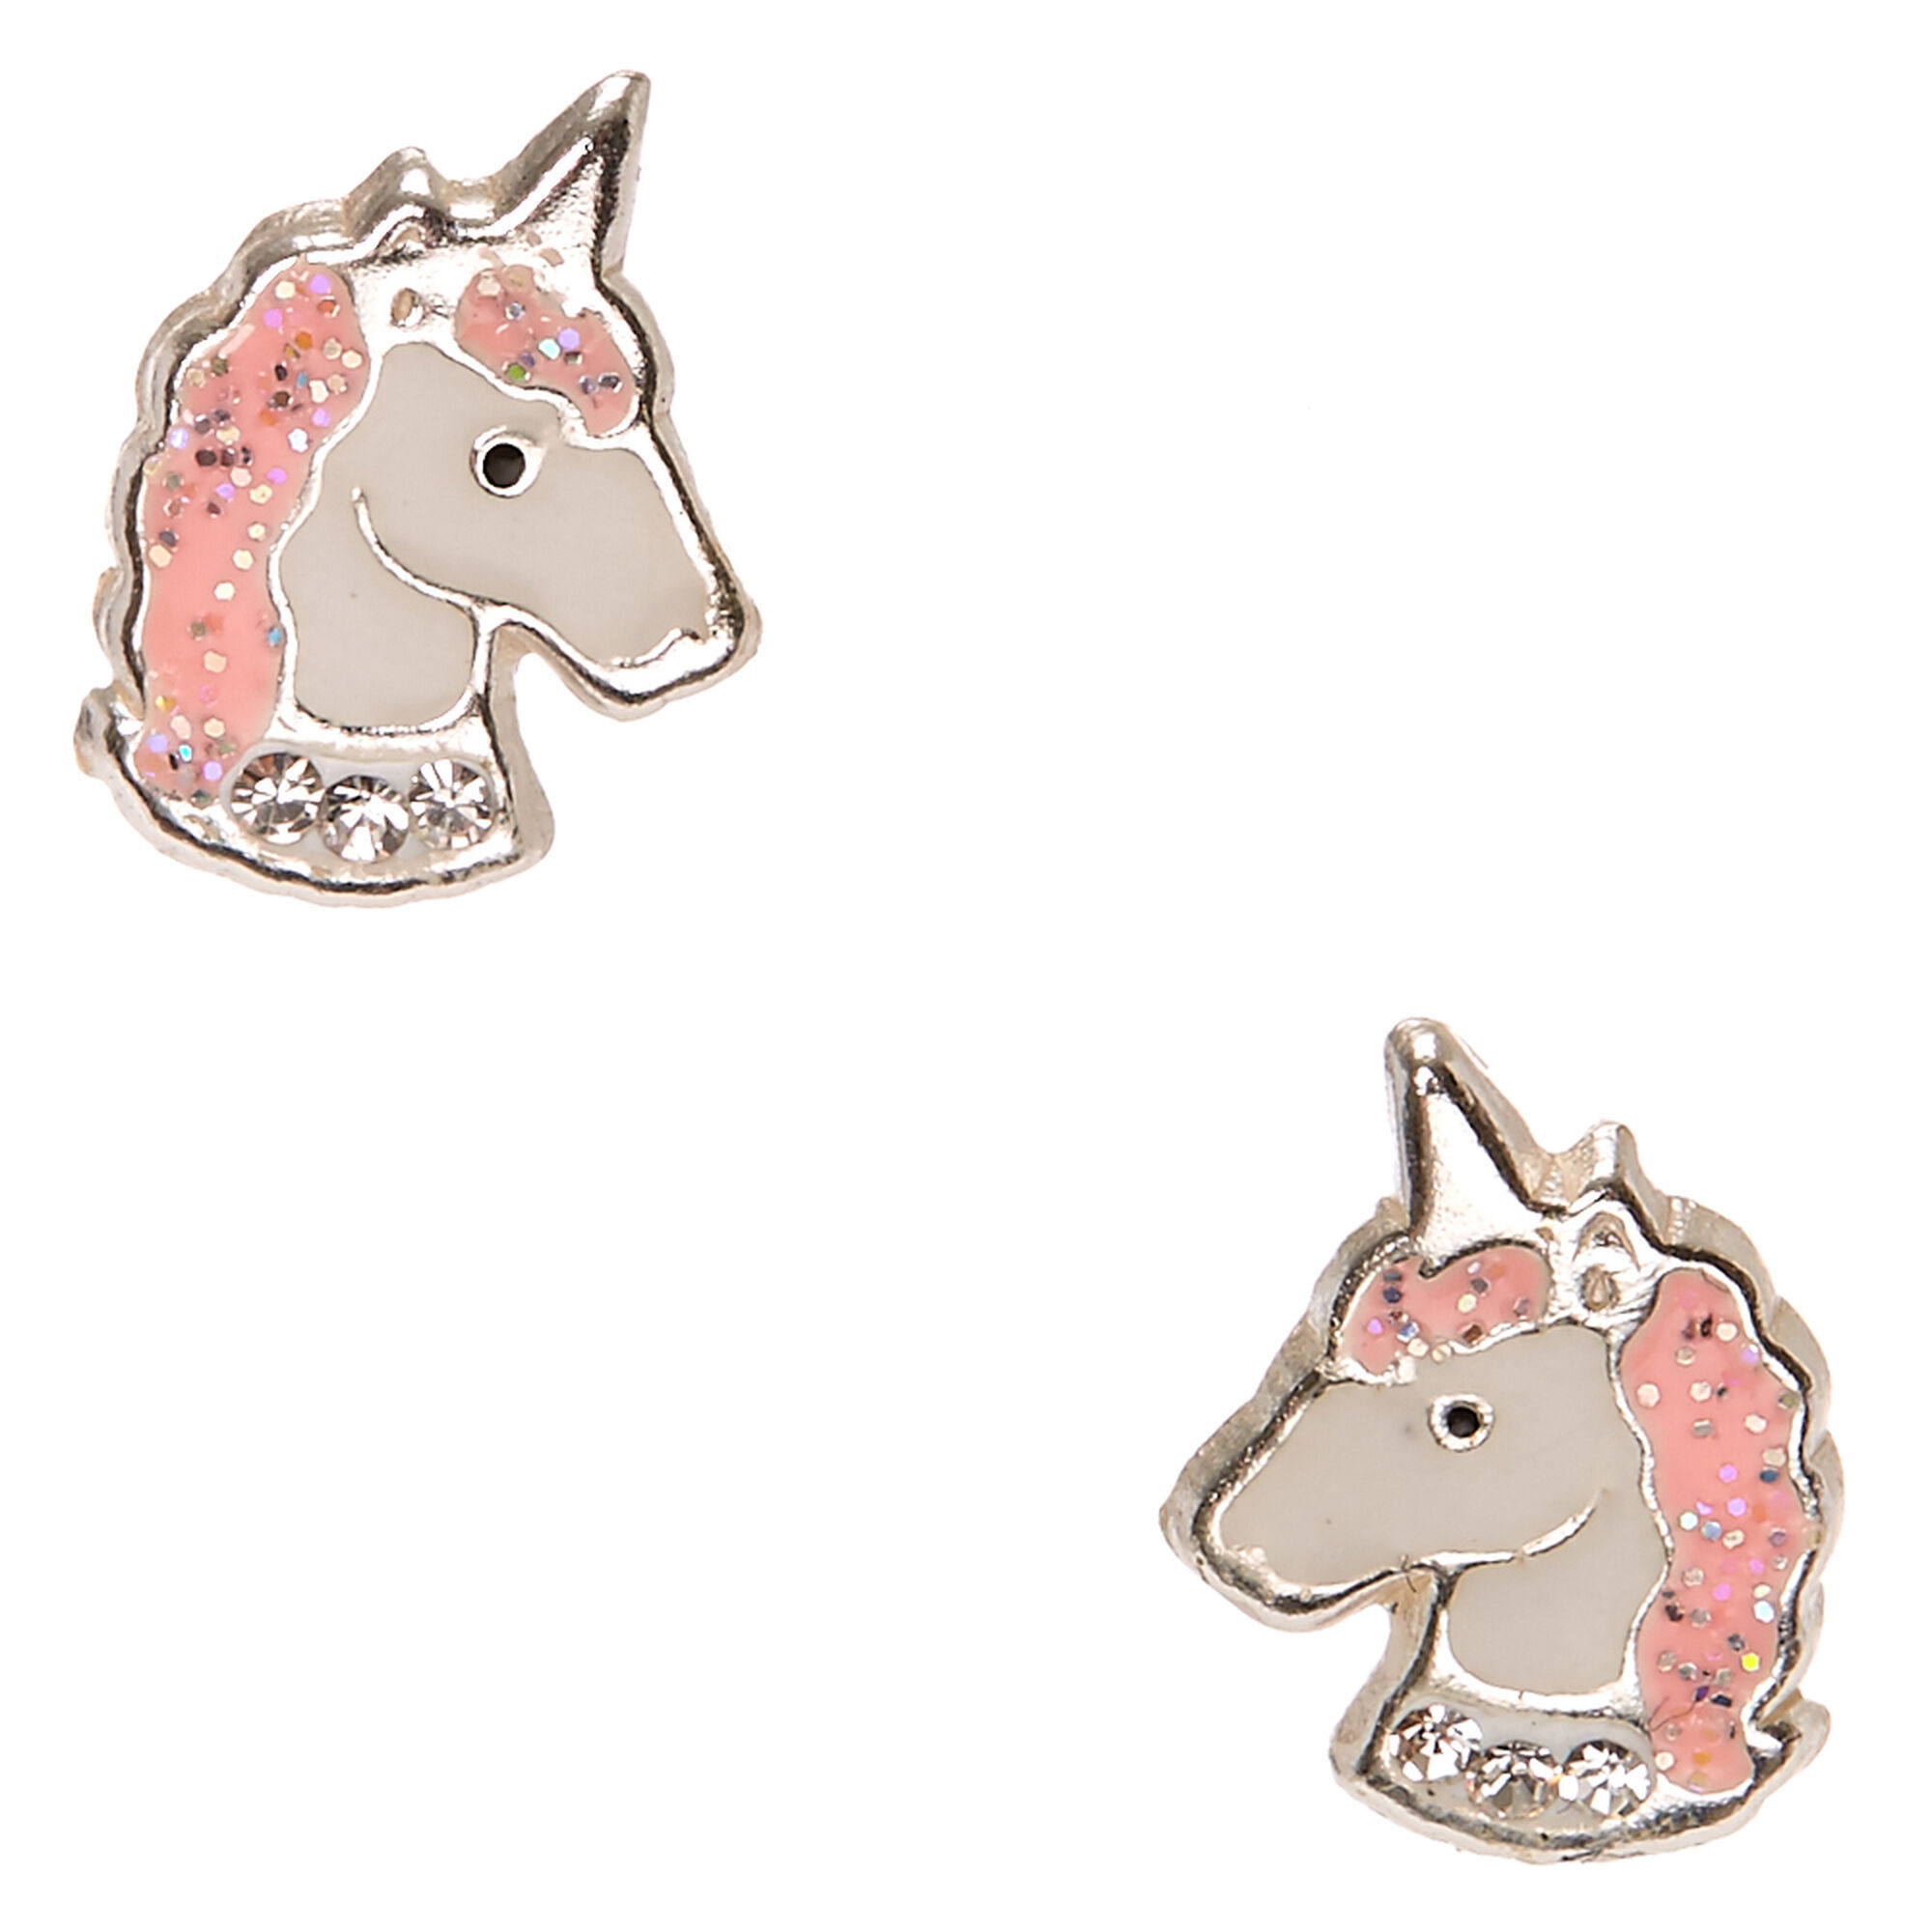 New on card Claire's sterling silver unicorn head stud post earrings $12.99 Rtl 